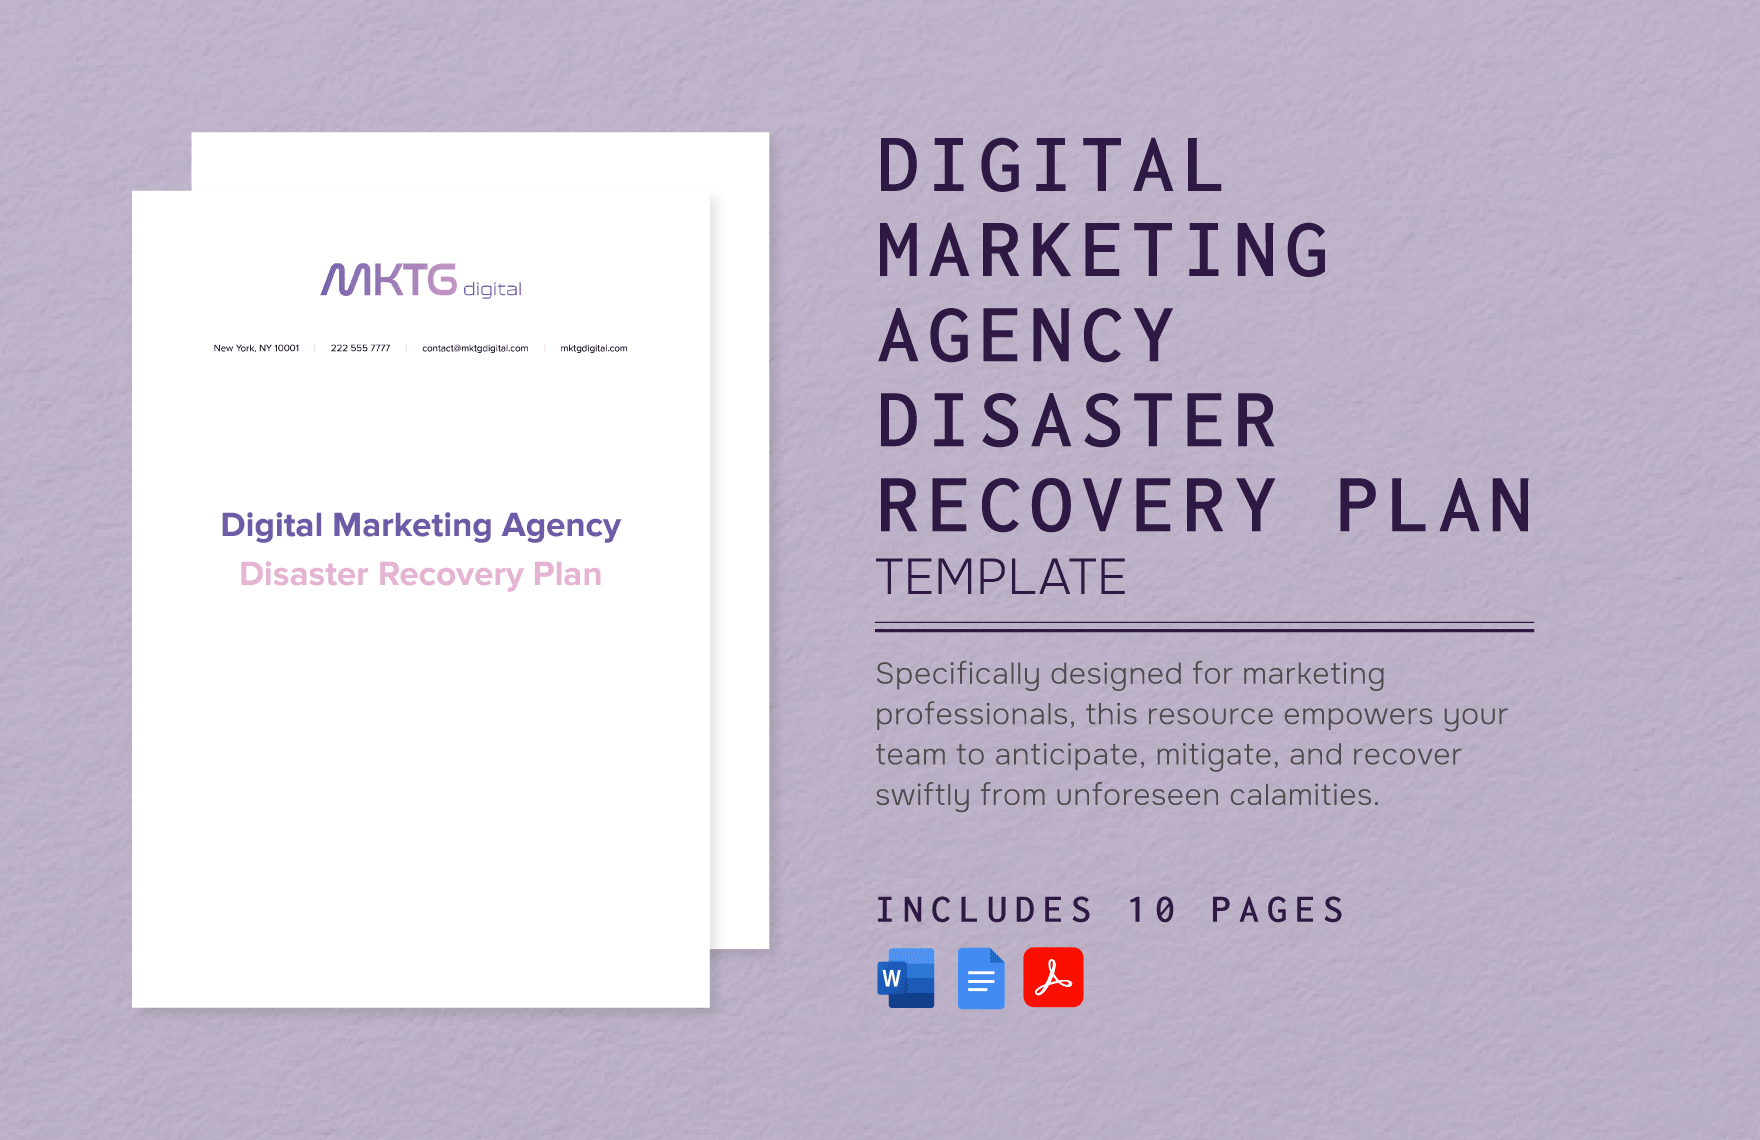 Digital Marketing Agency Disaster Recovery Plan Template